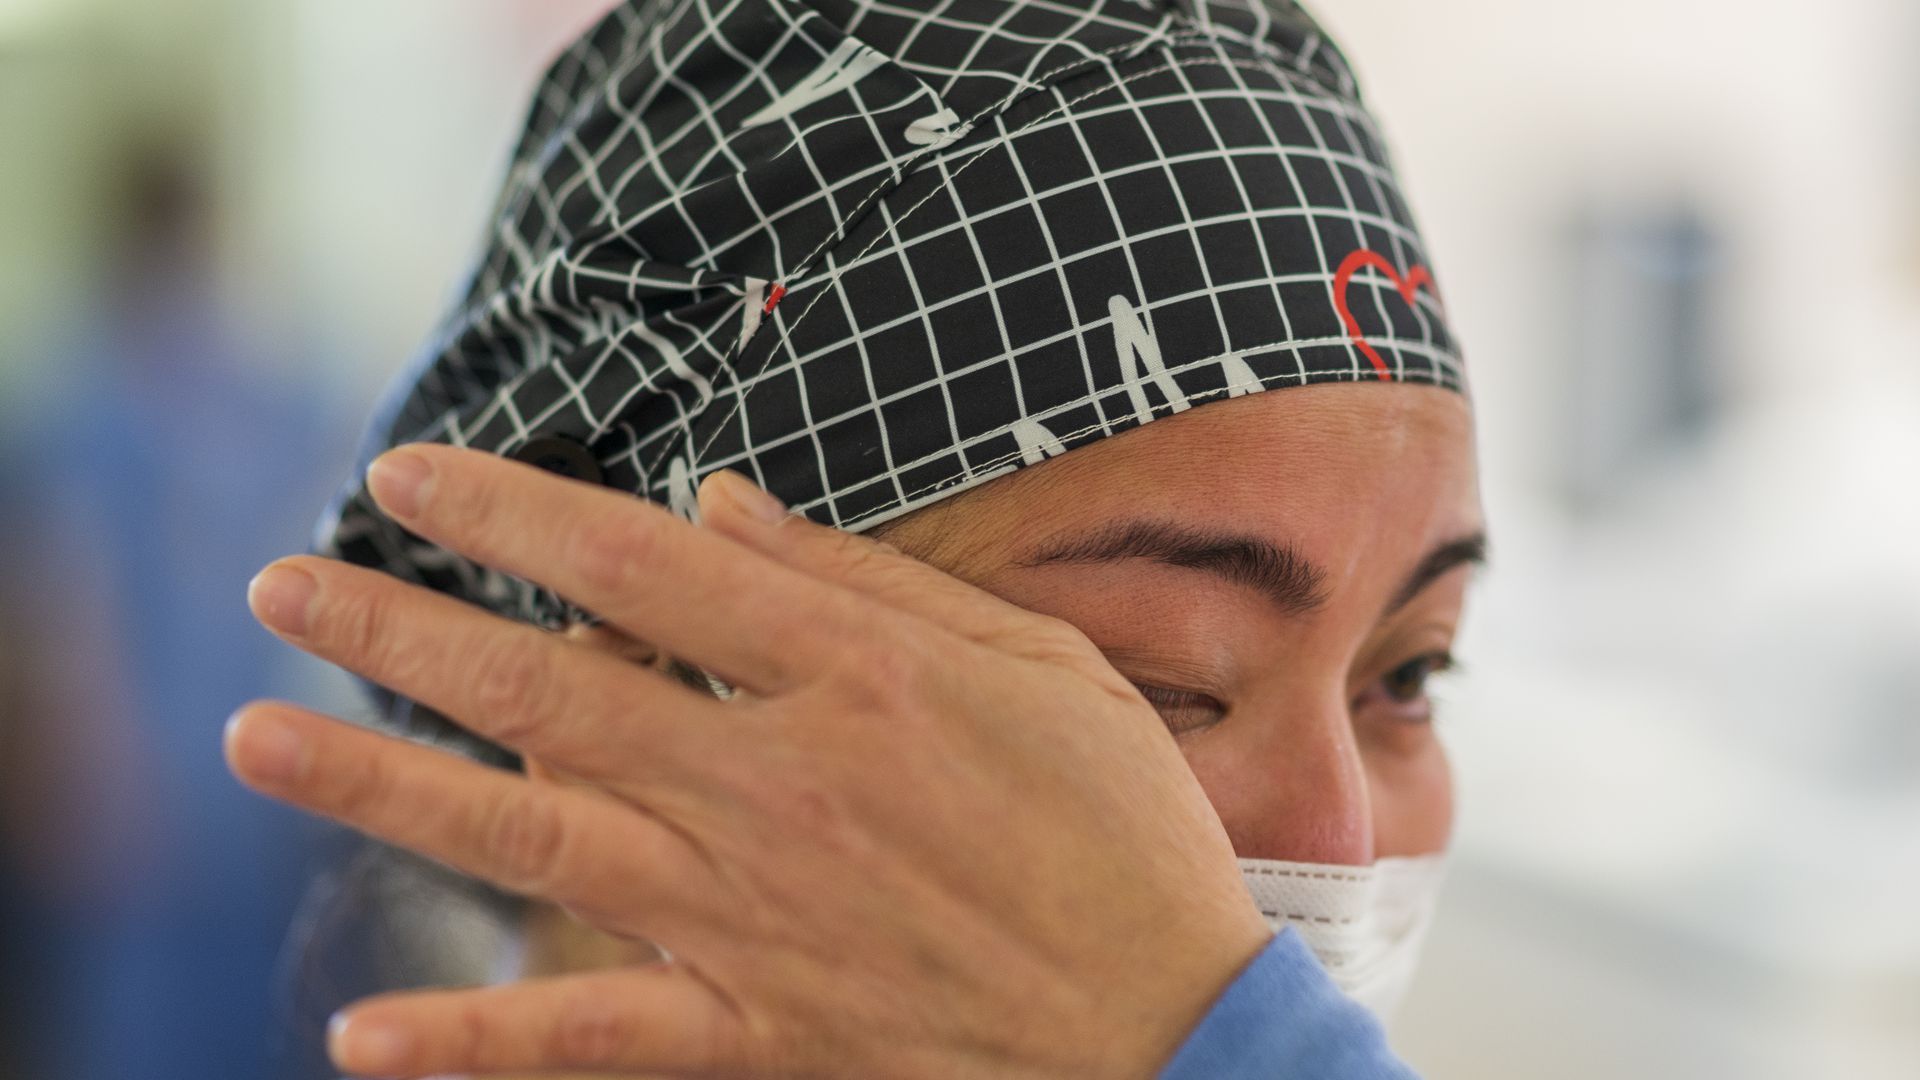 A nurse wipes away tears inside the Covid-19 unit of Salinas Valley Memorial Hospital in California. Photo: Nic Coury/Bloomberg via Getty Images